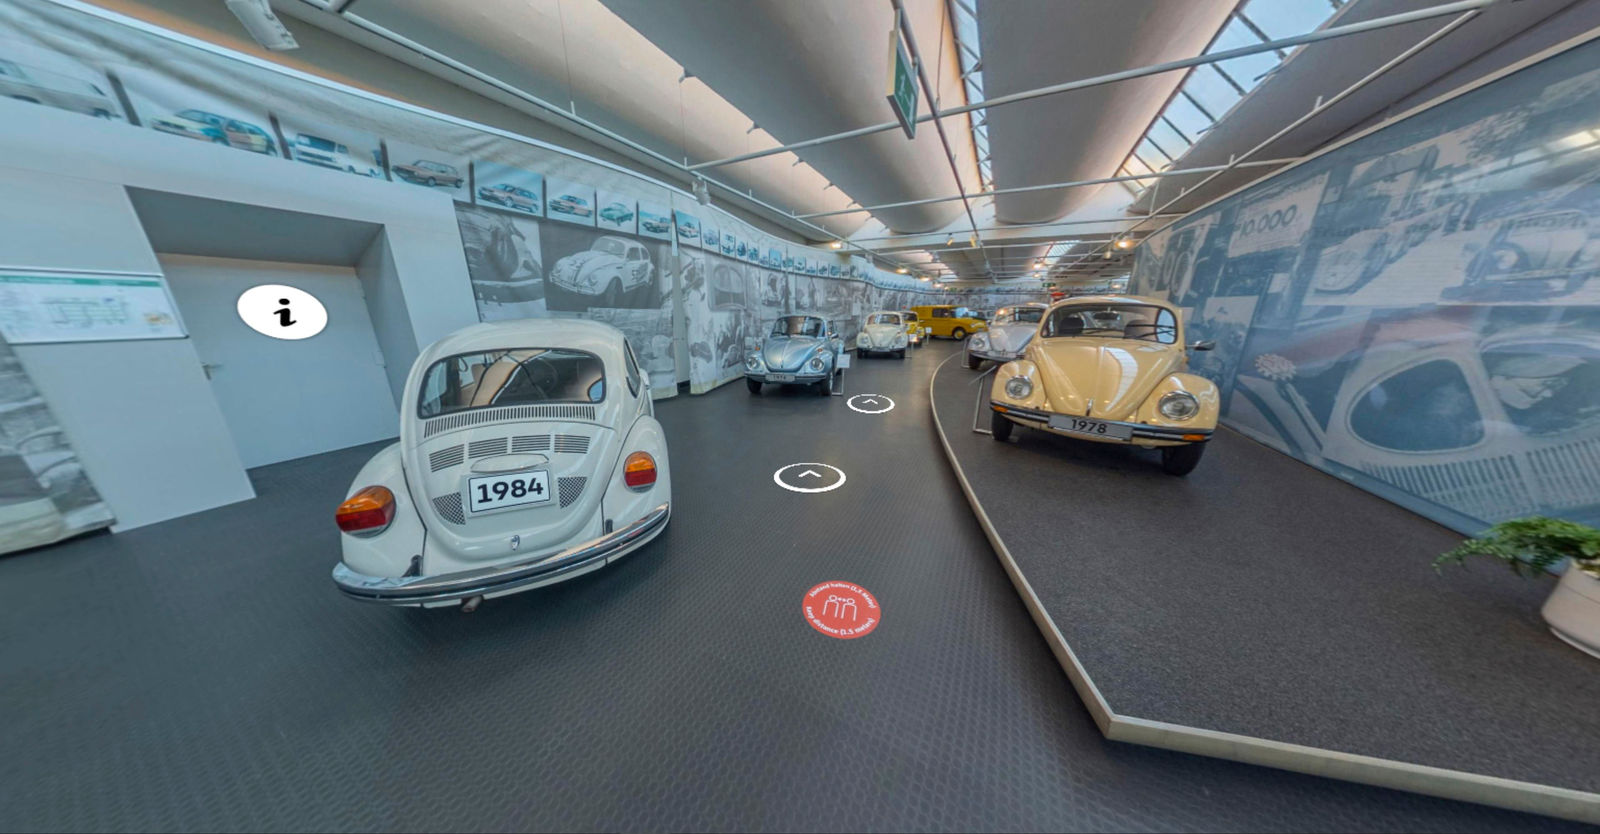 AutoMuseum Volkswagen „goes“ virtuell